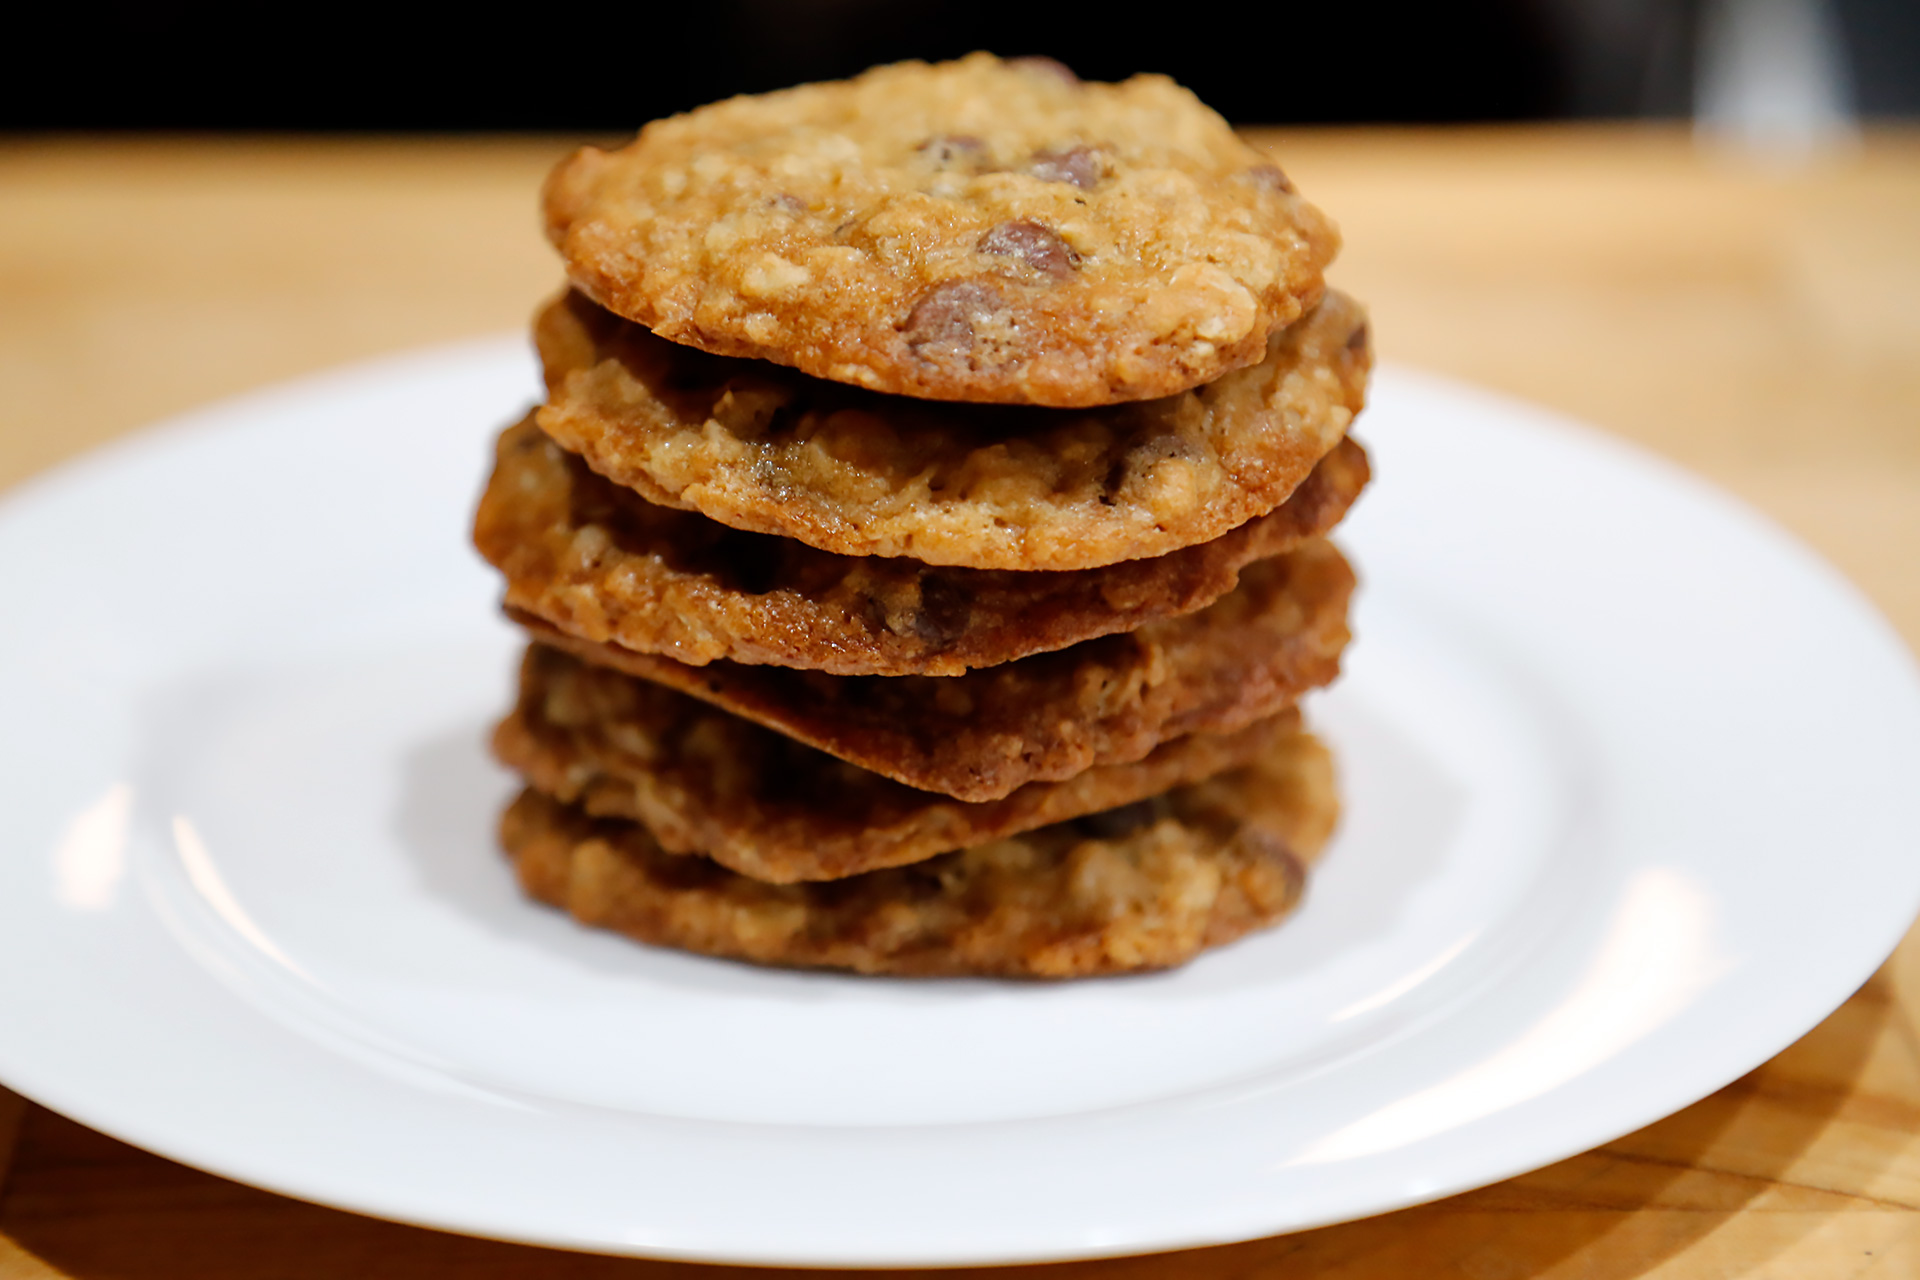 Serve the Oatmeal-Chocolate Chip Cookies